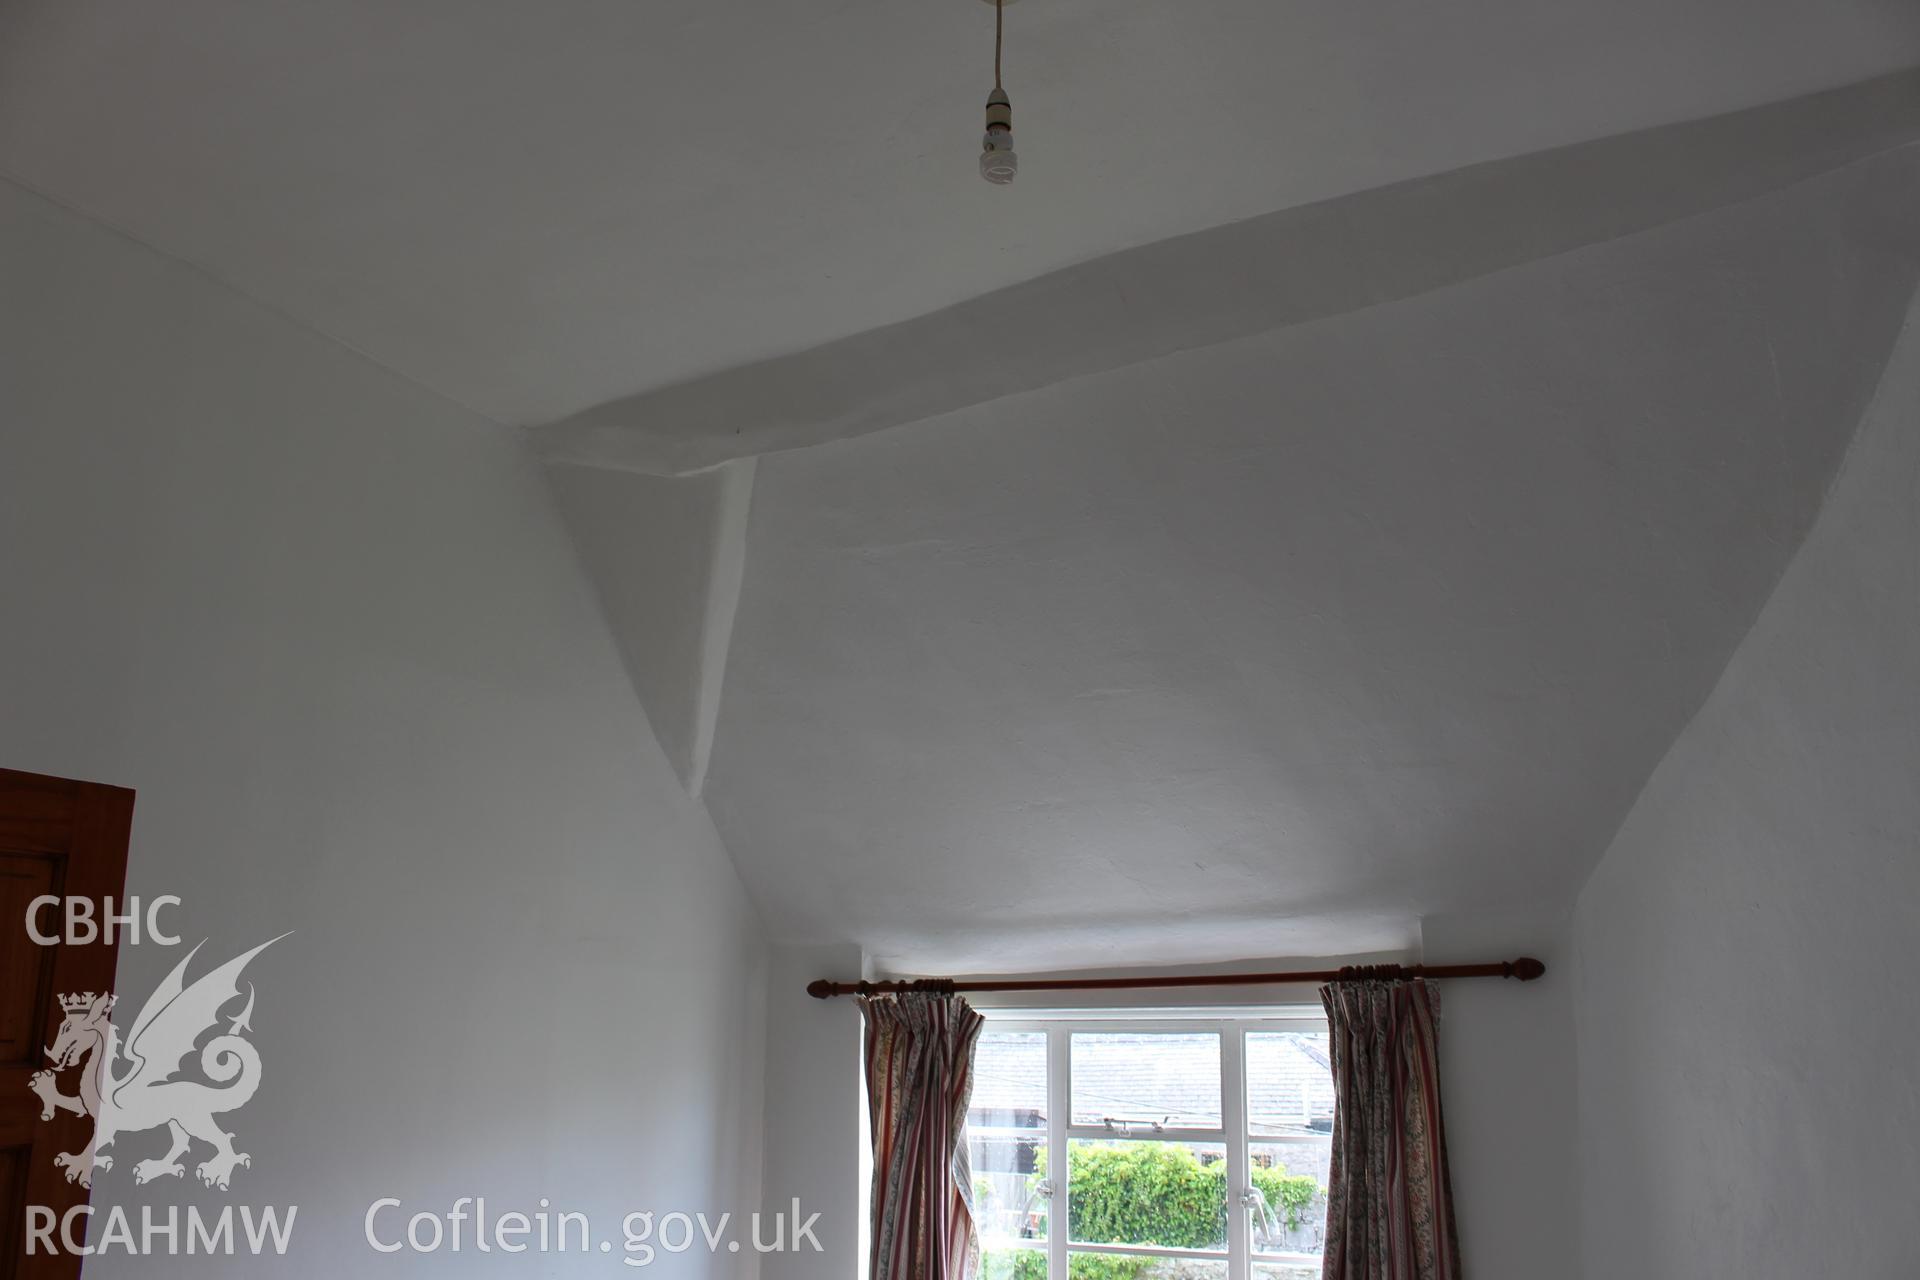 Colour photograph showing interior room with sloping ceiling at 5-7 Mwrog Street, Ruthin. Photographed during survey conducted by Geoff Ward on 14th May 2014.